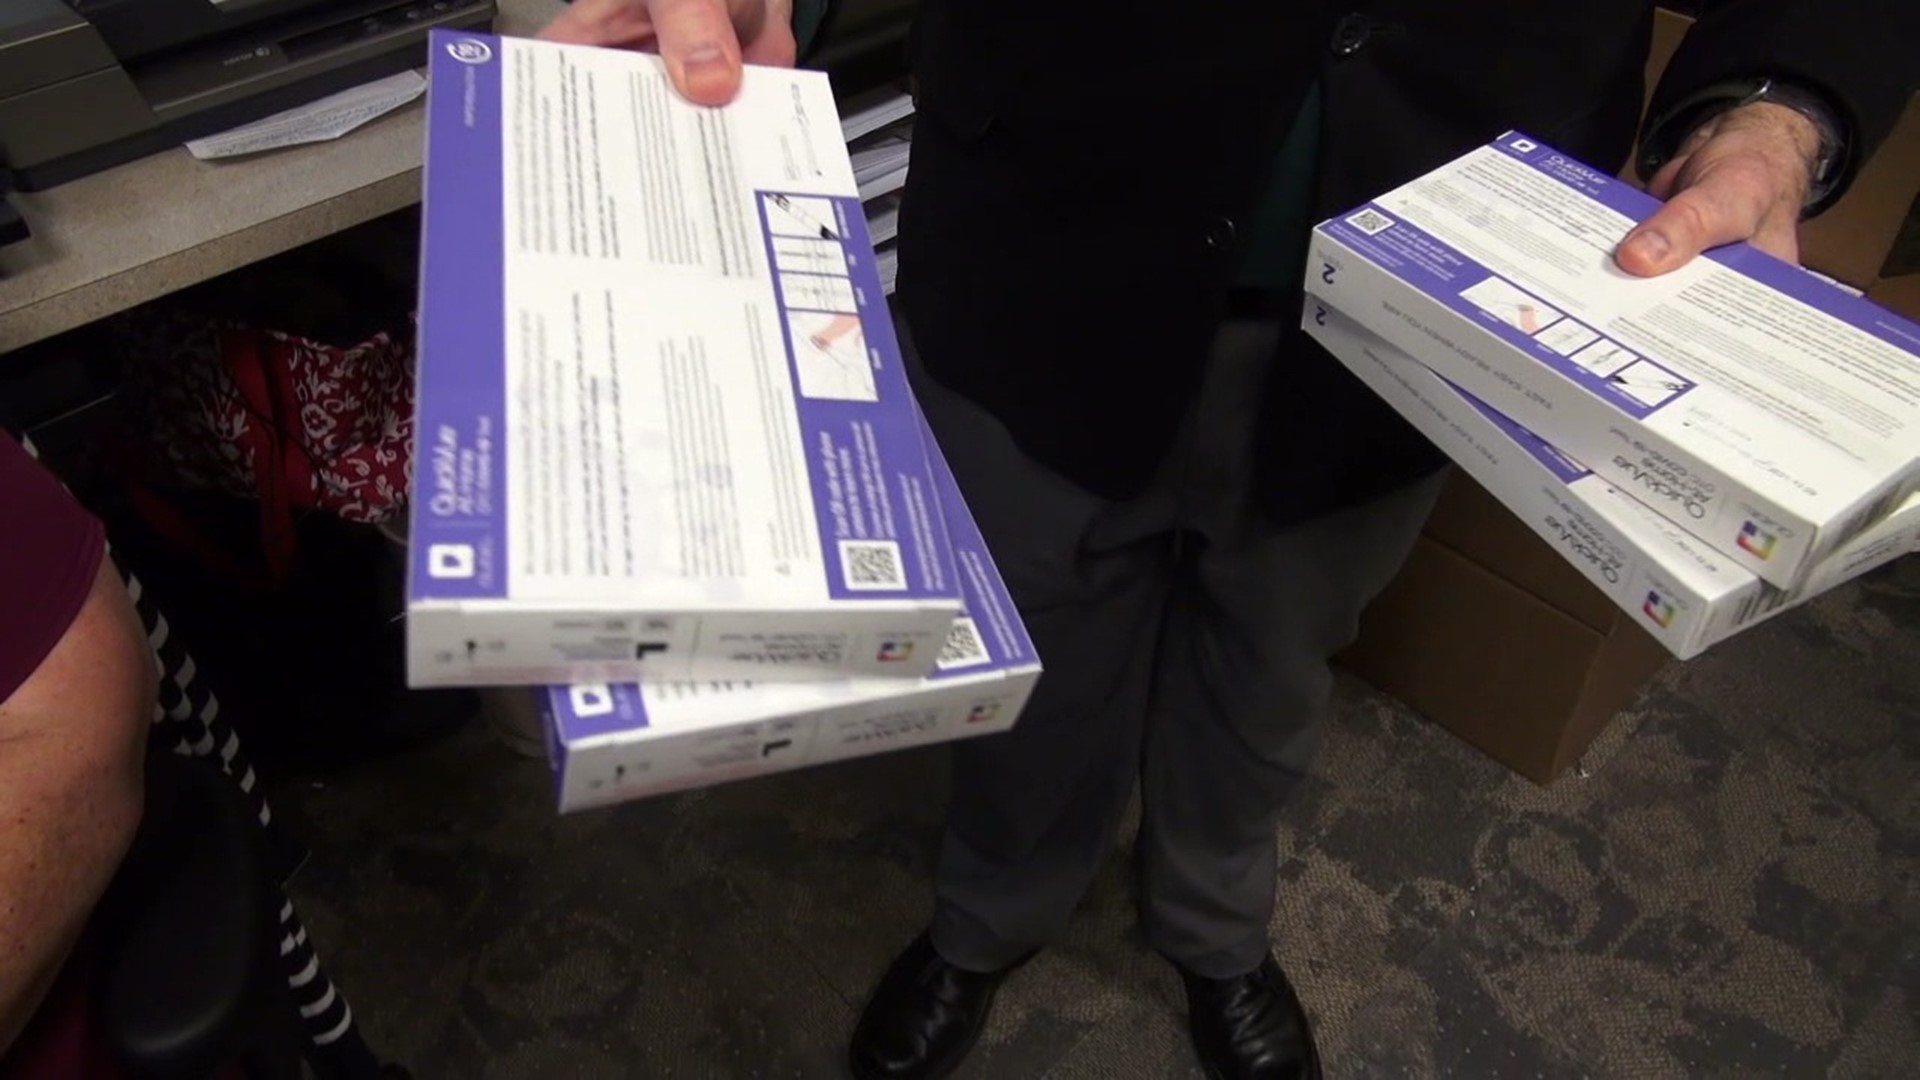 A health care system in Wayne County will be distributing thousands of at-home COVID-19 test kits over the next few weeks.